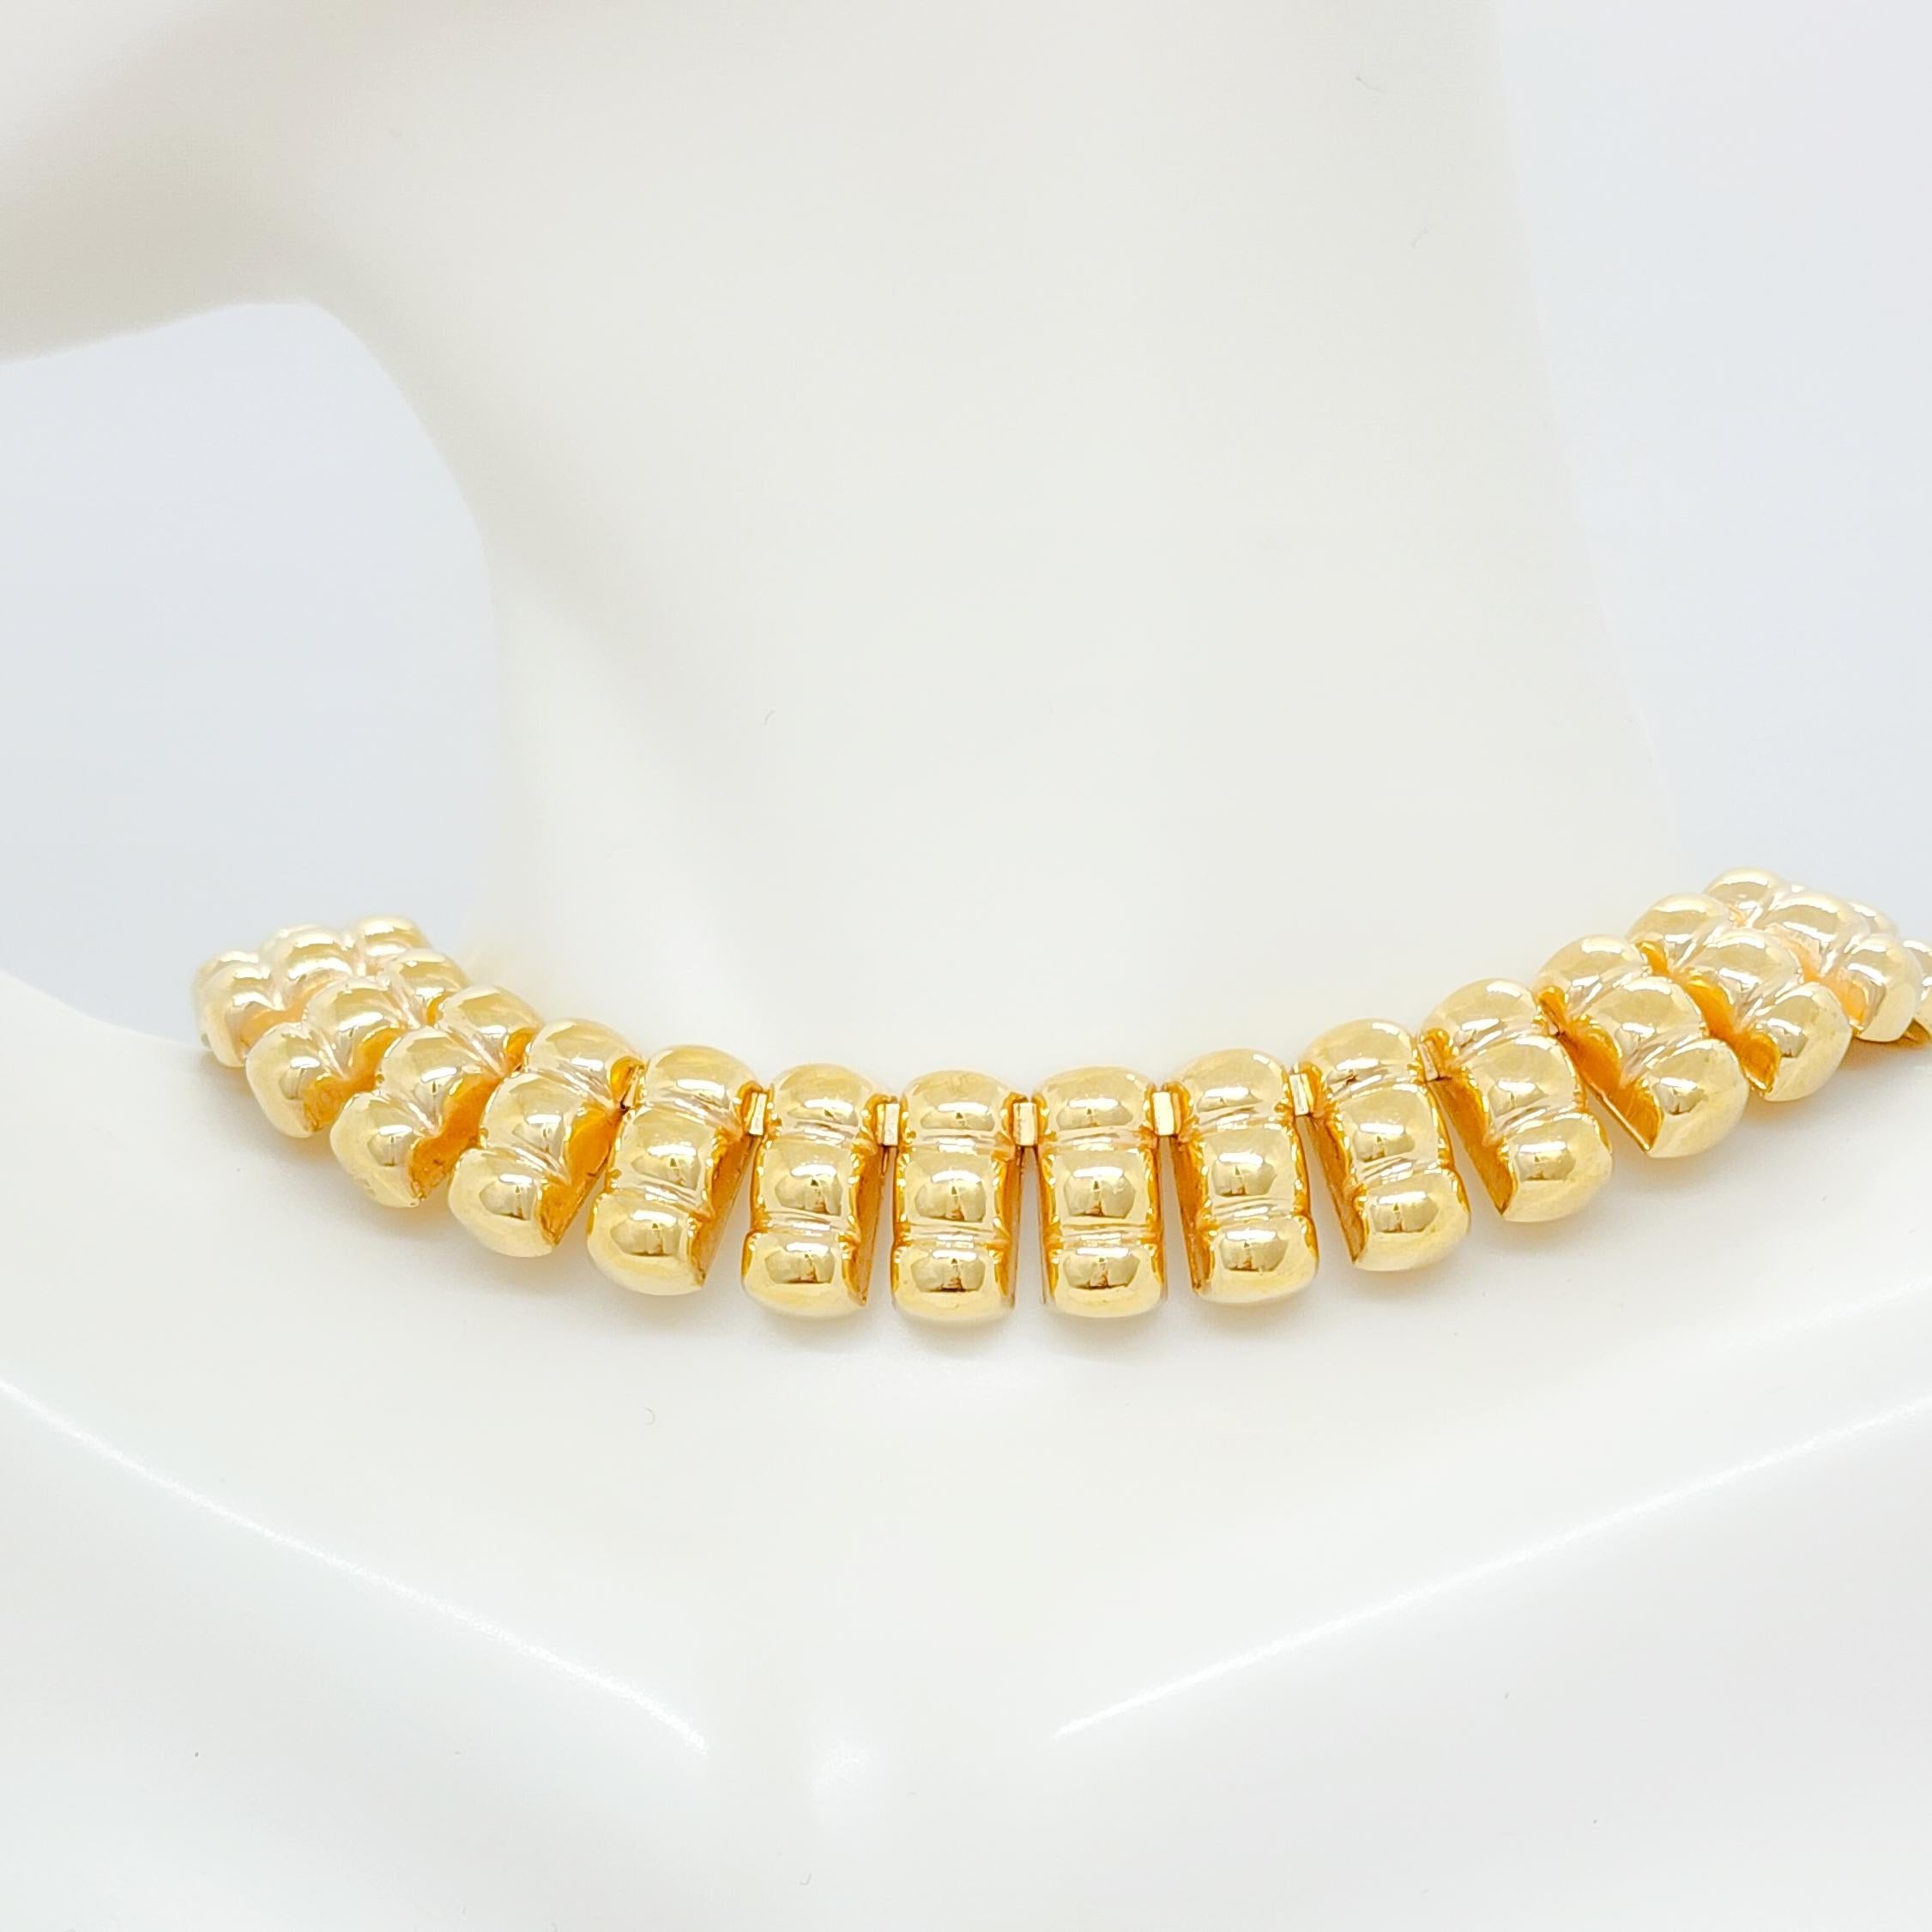 Beautiful necklace with a nice bead type design handmade in 18k yellow gold.  Length is 14.5